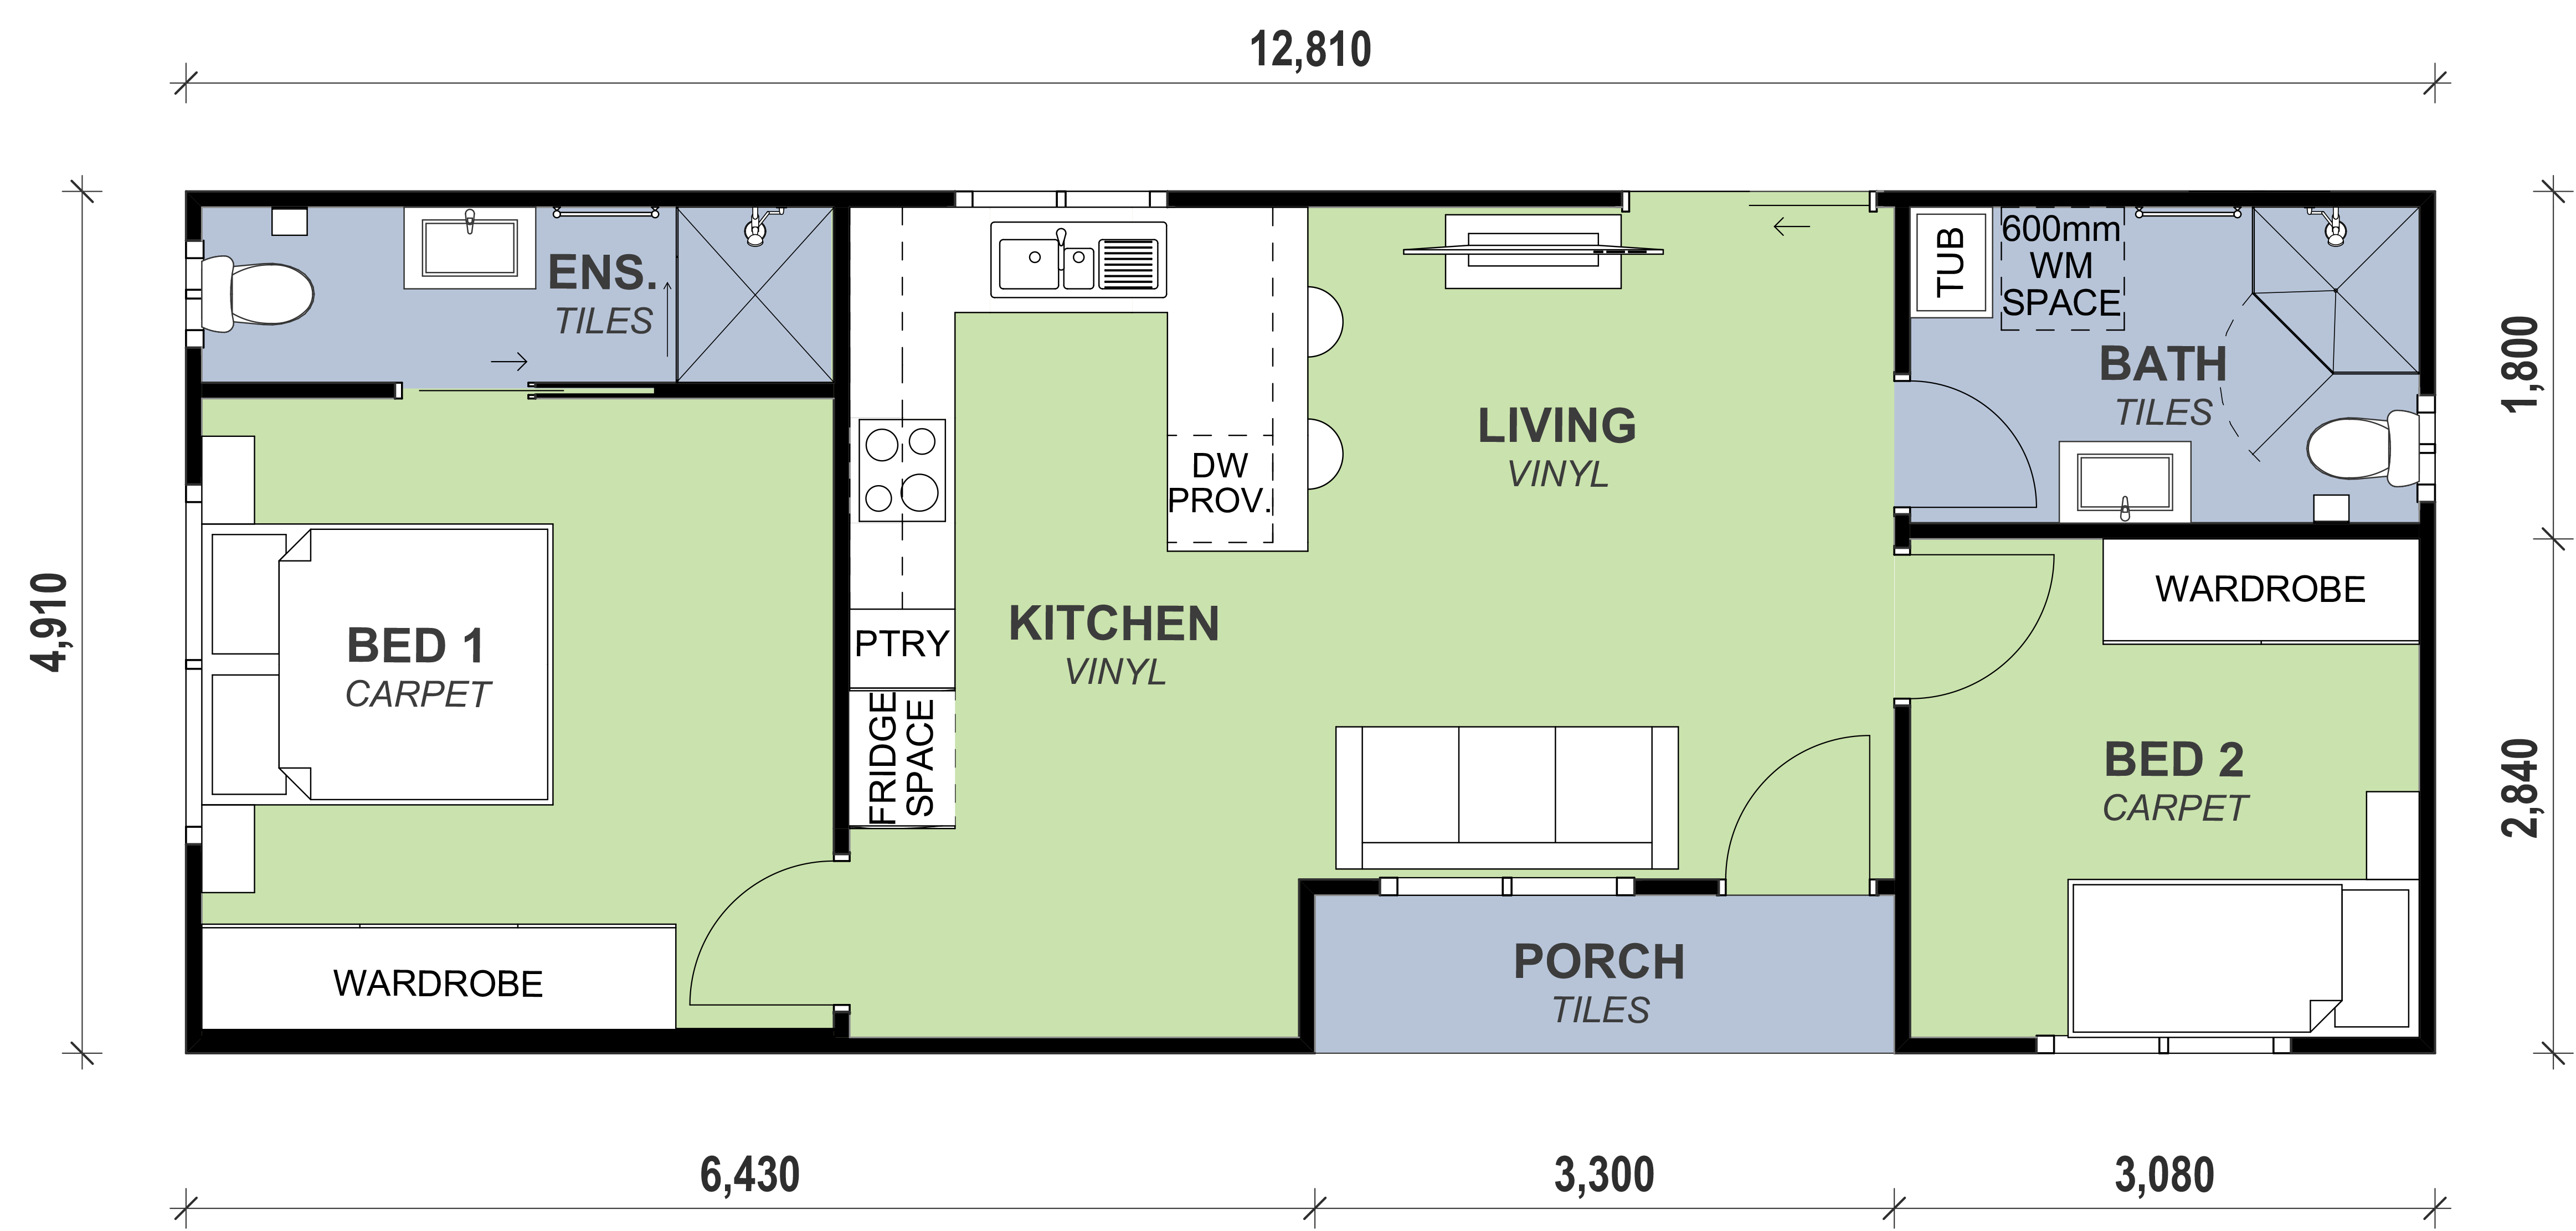 Epping granny flat floor plan with porch